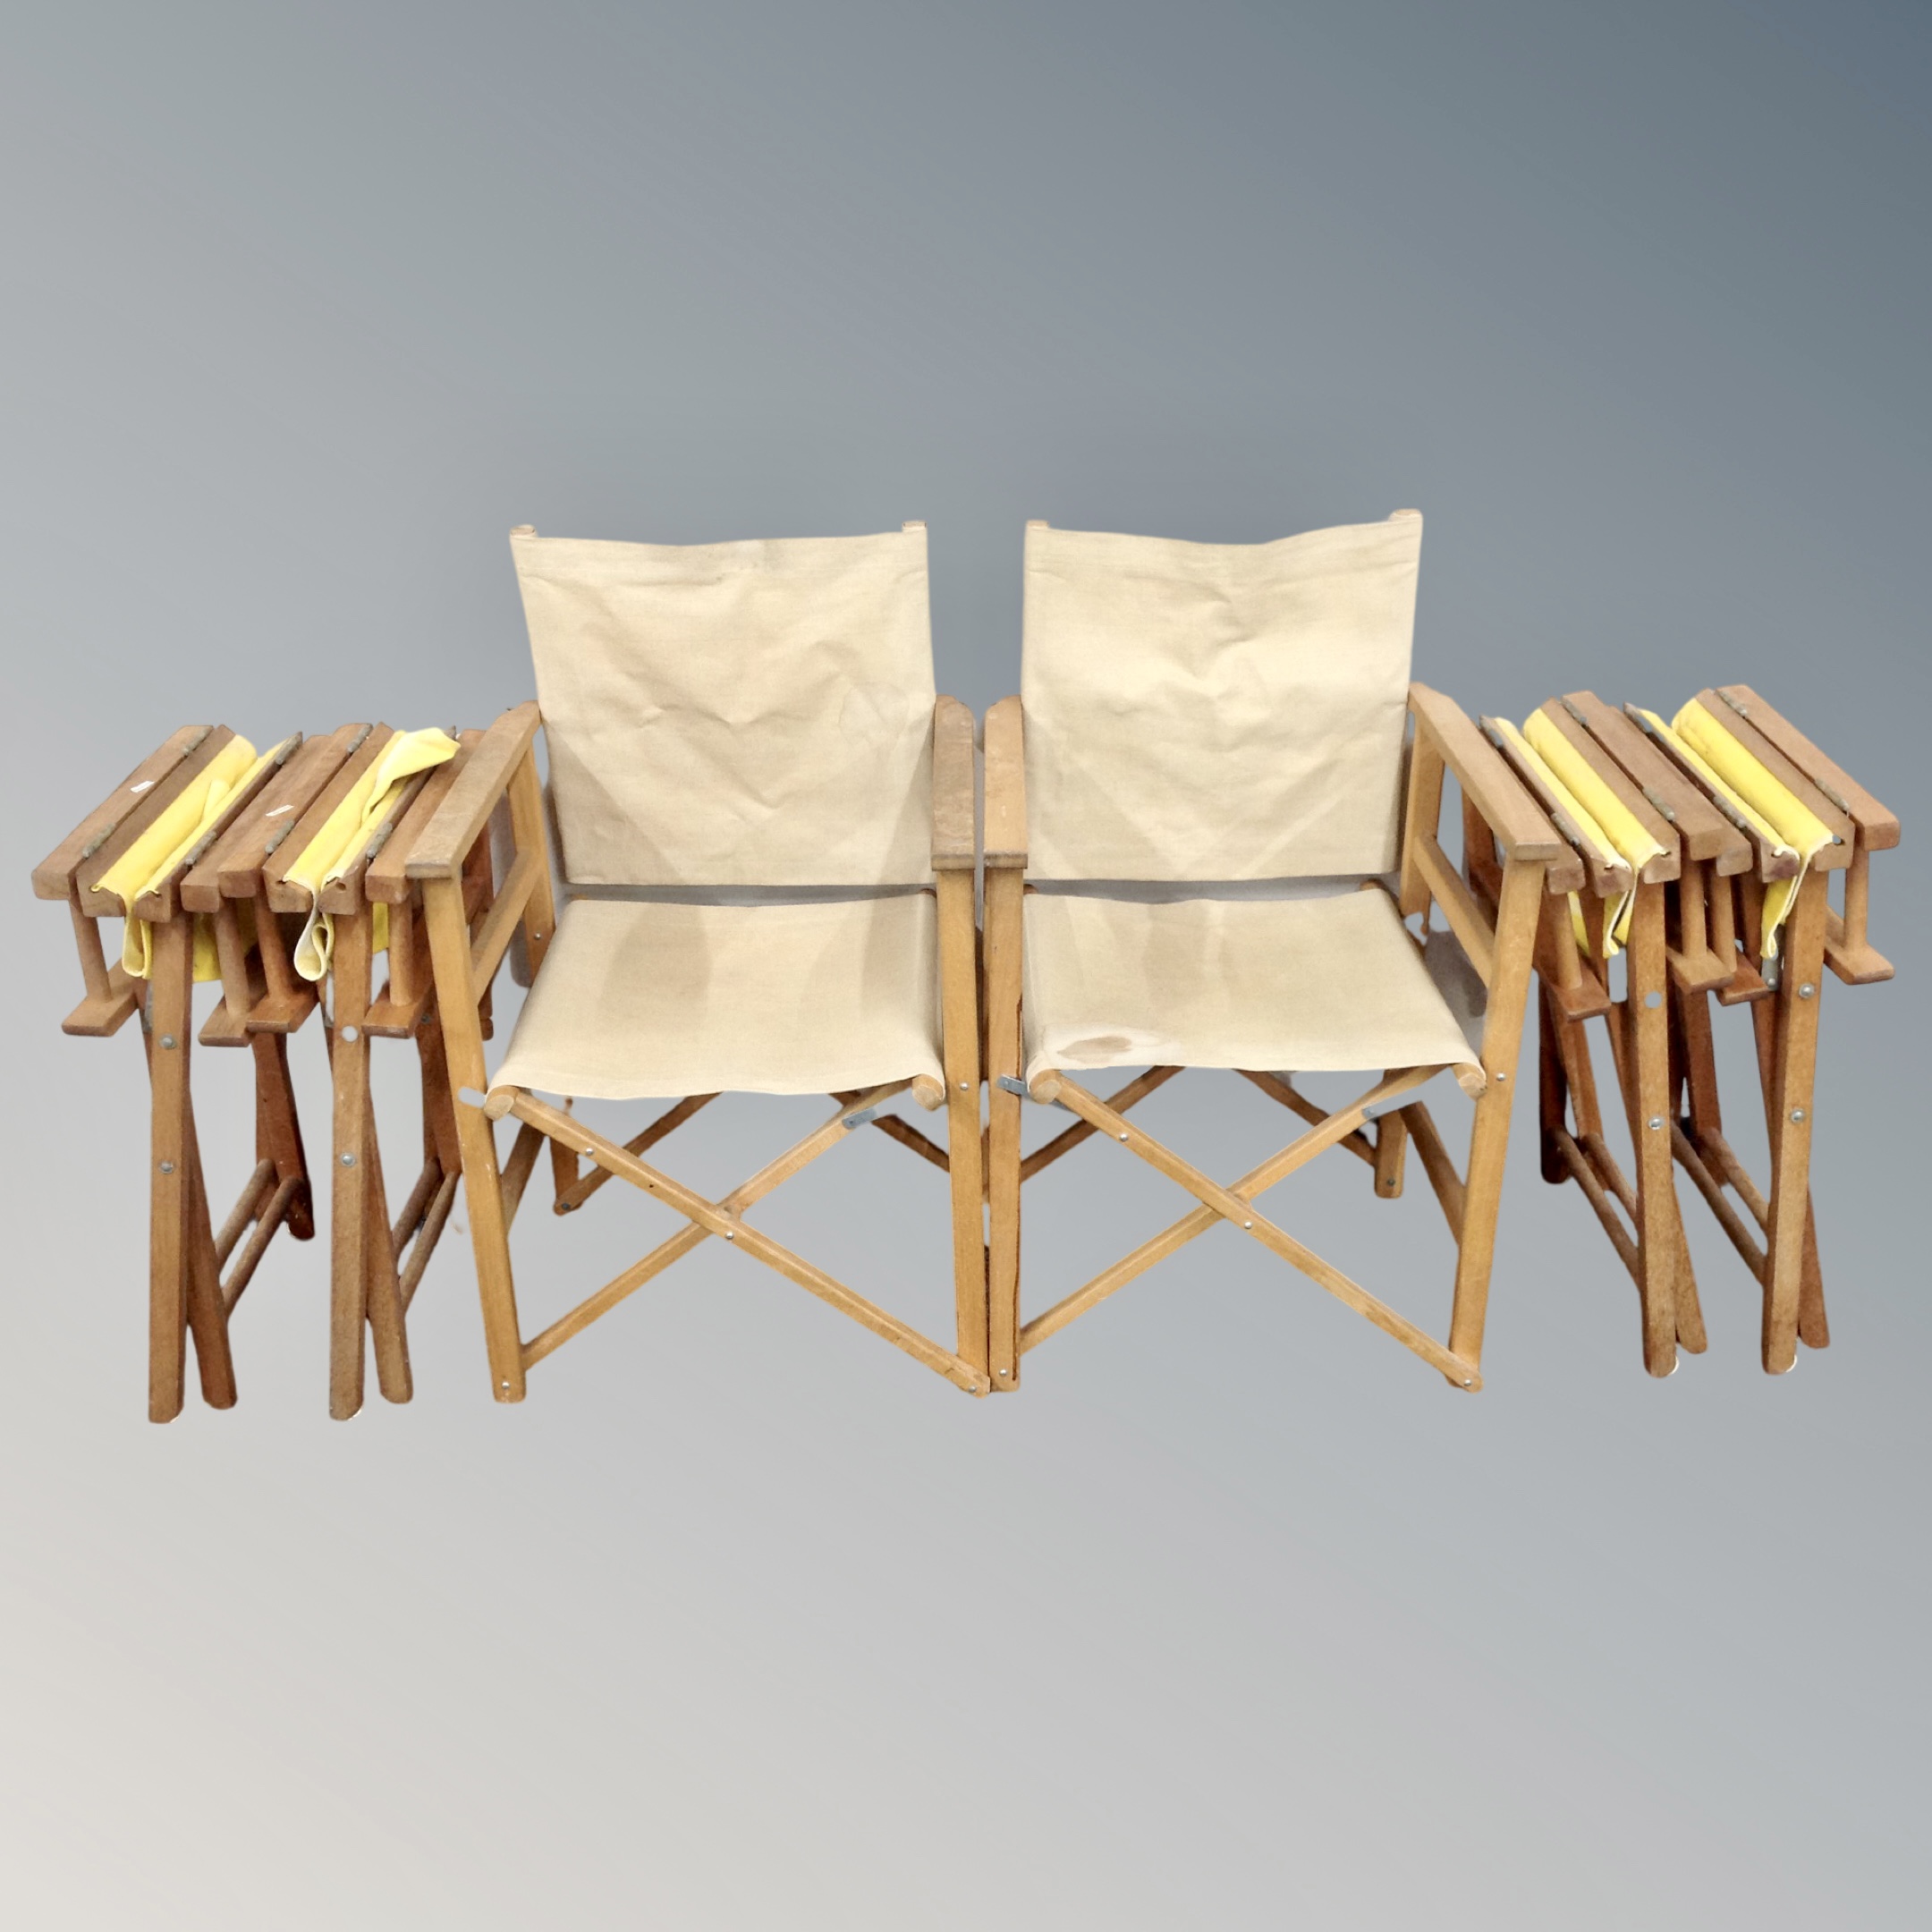 A pair of folding director's chairs together with a further set of four director's chairs.